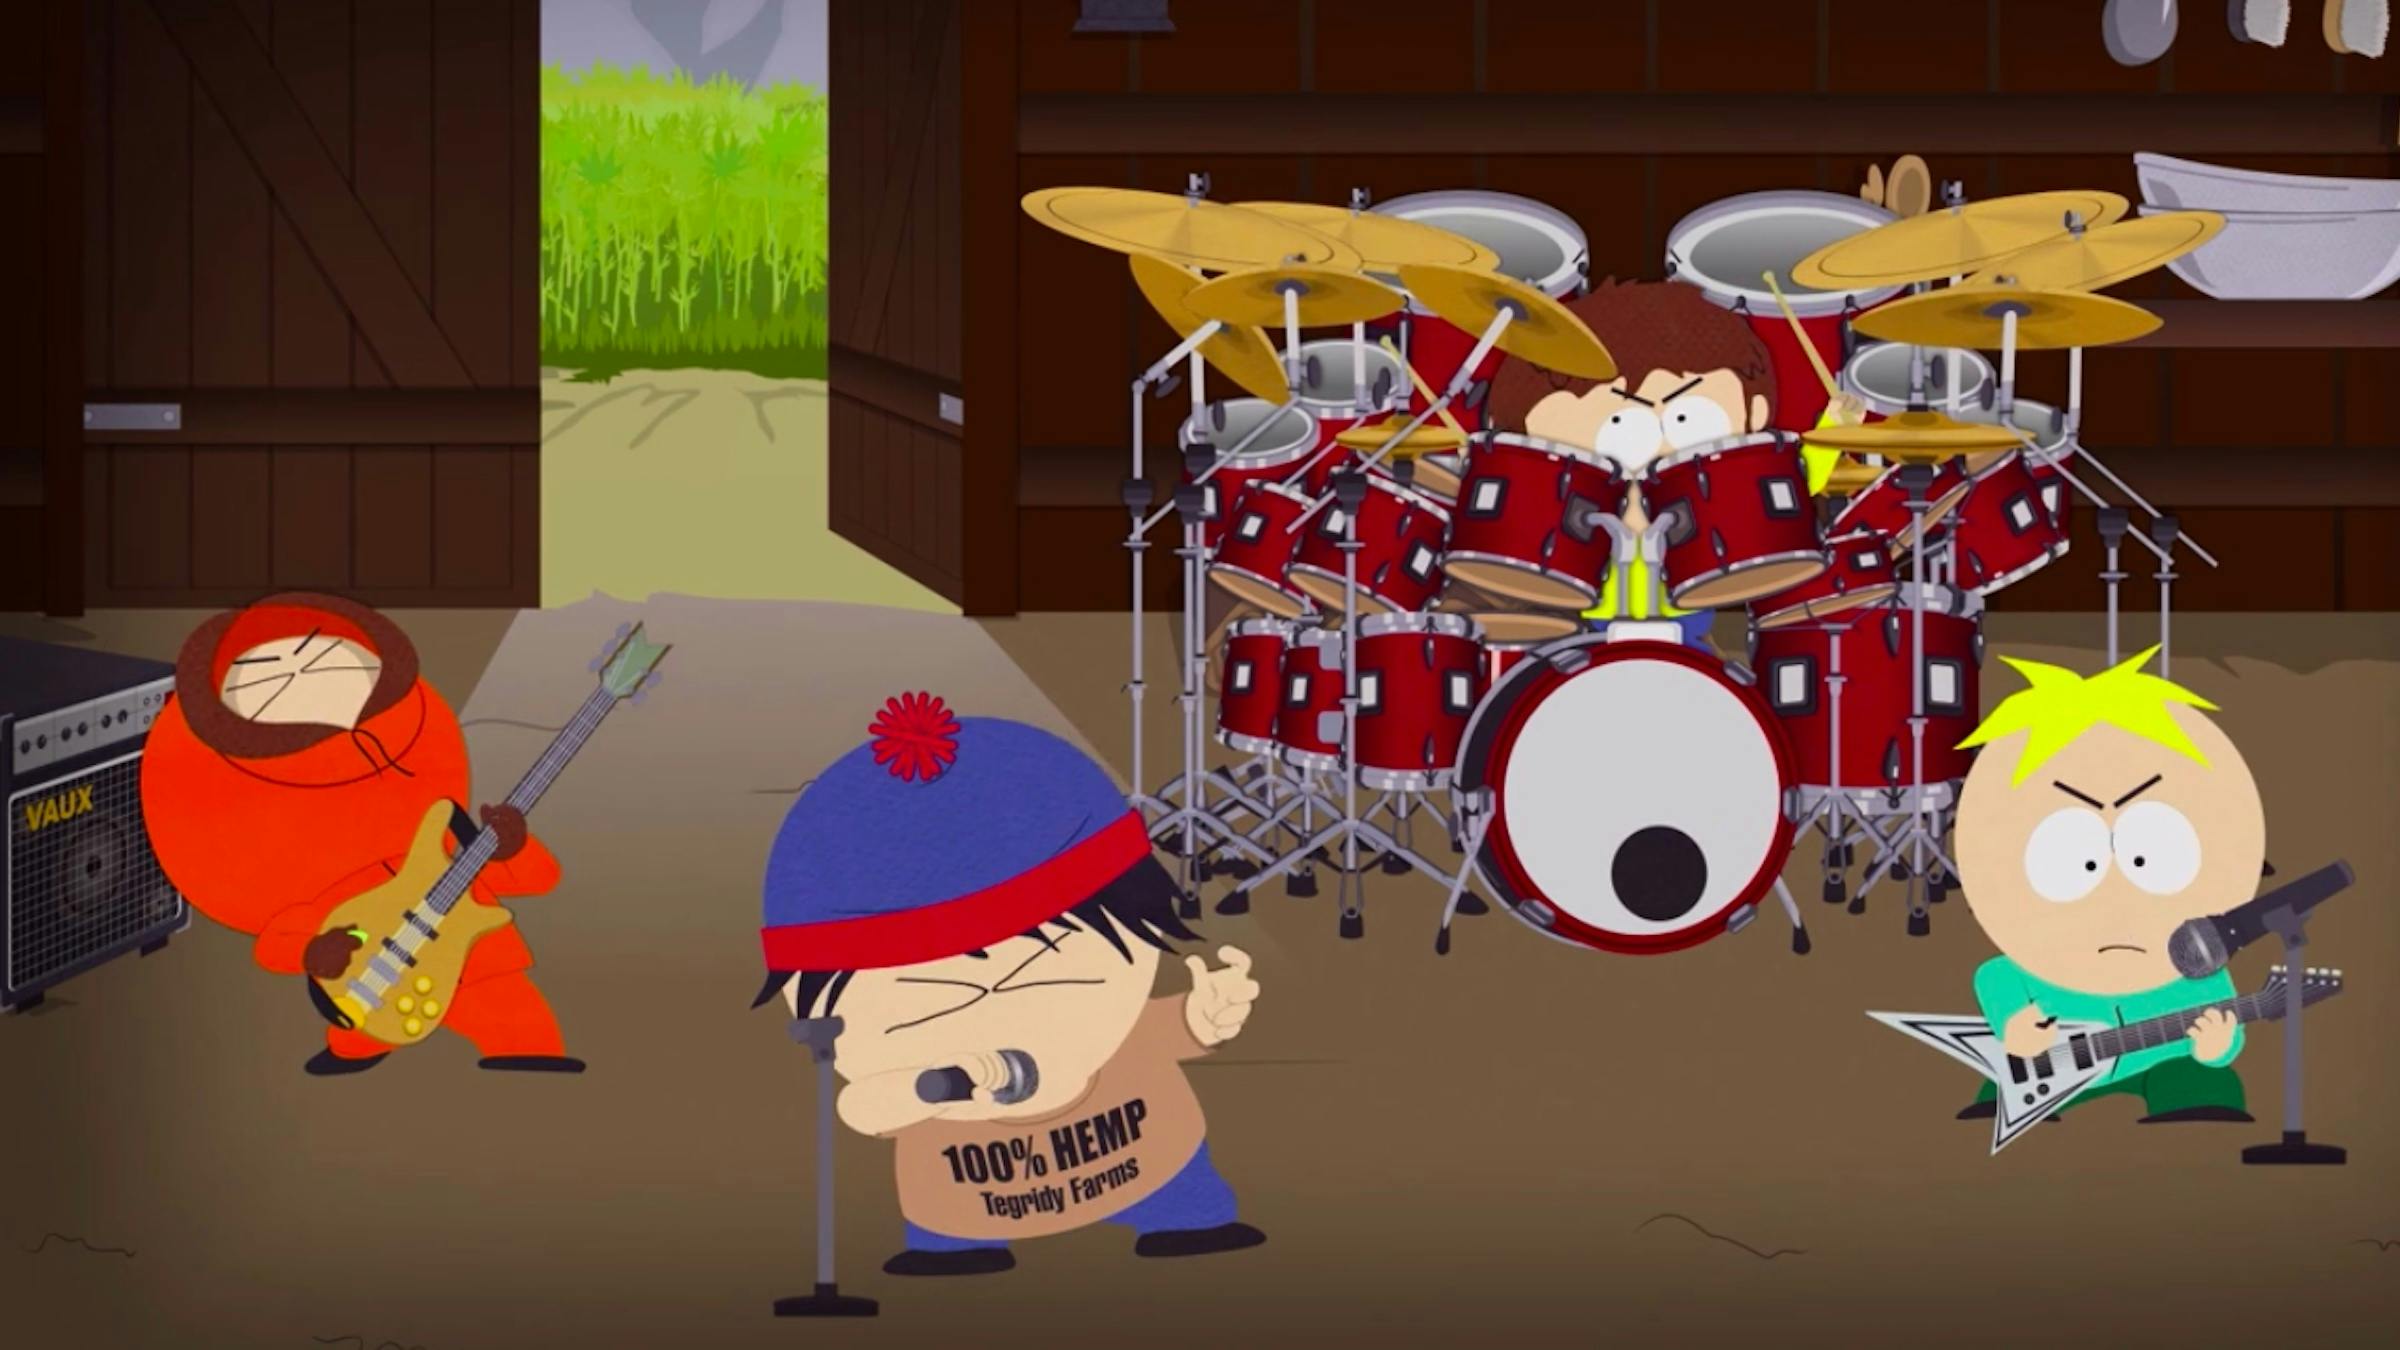 A Dying Fetus Track Appeared On South Park